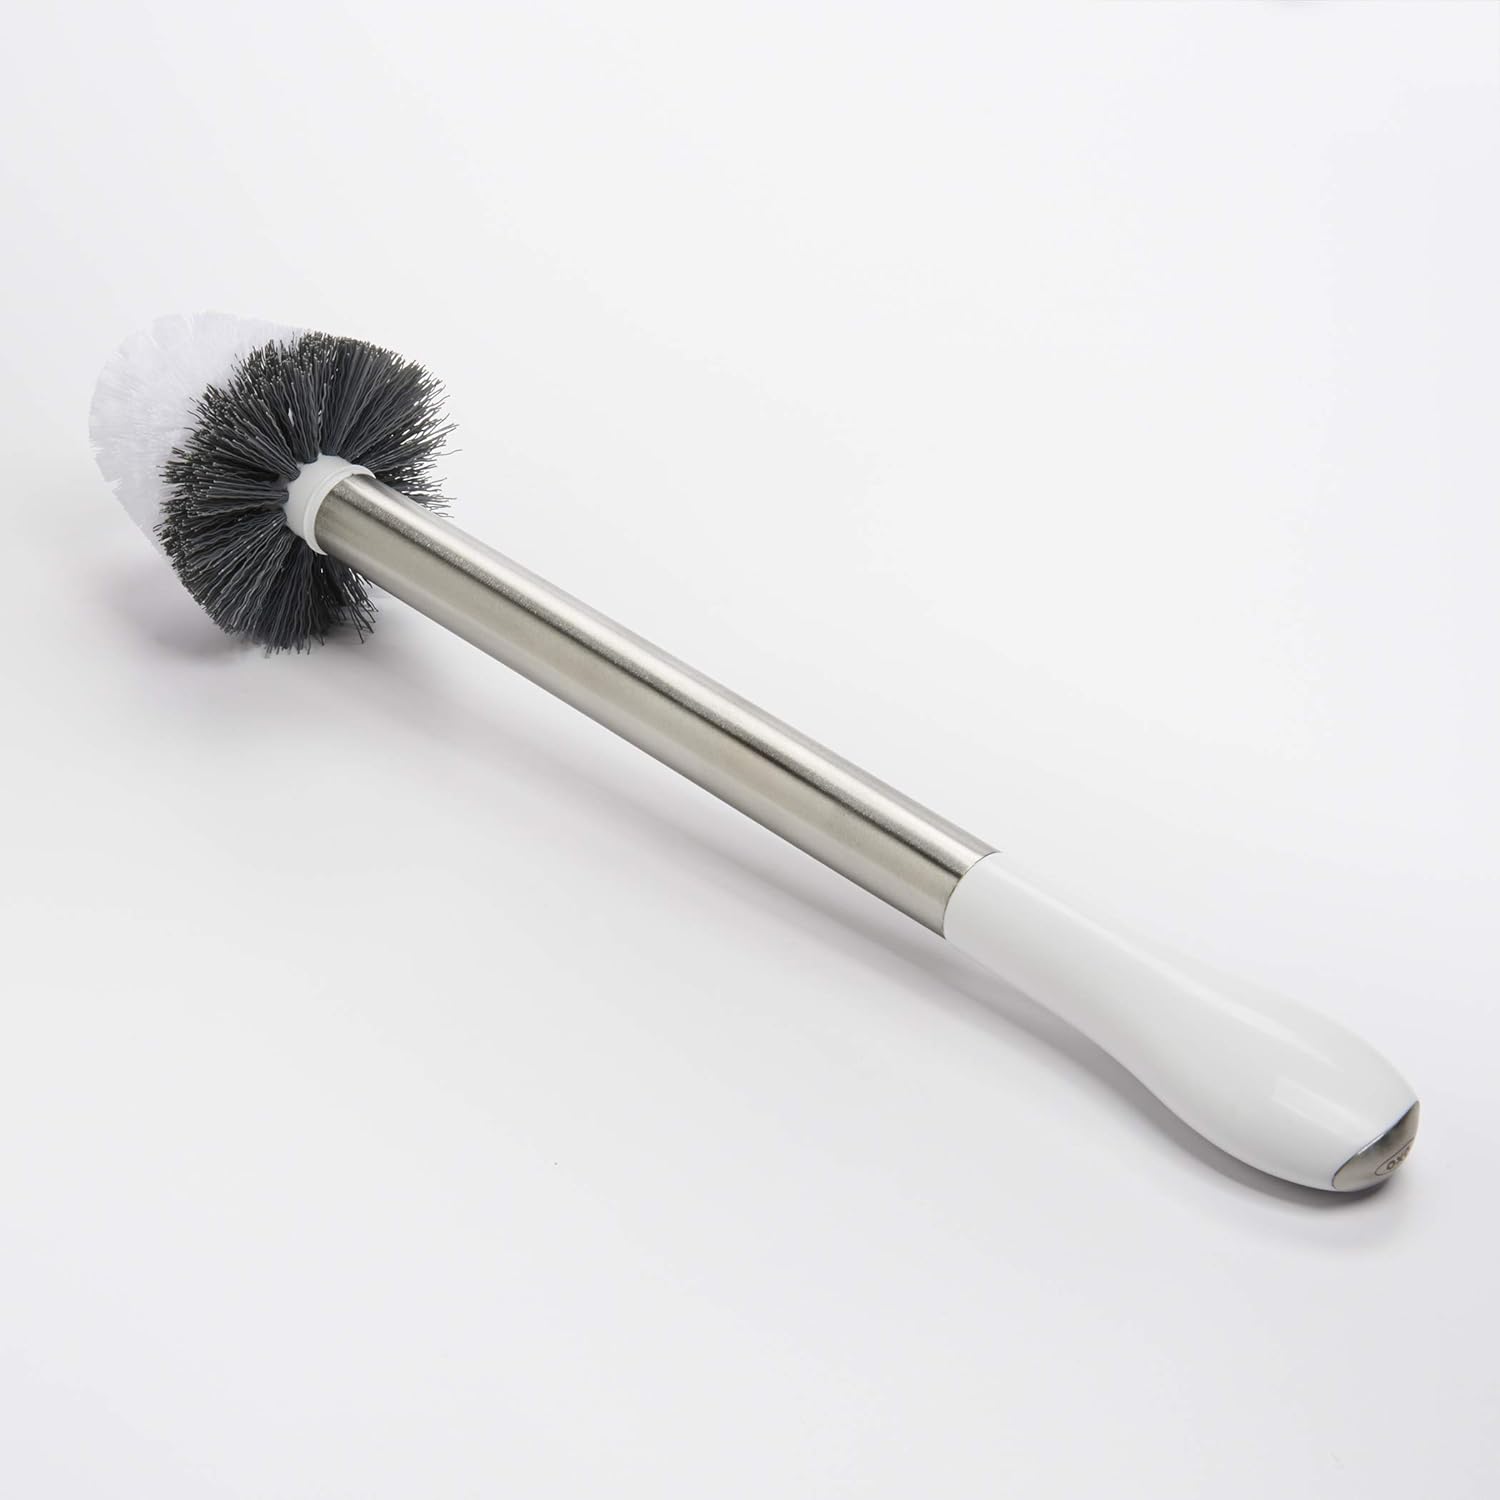 OXO Good Grips Stainless Steel Toilet Brush and Canister